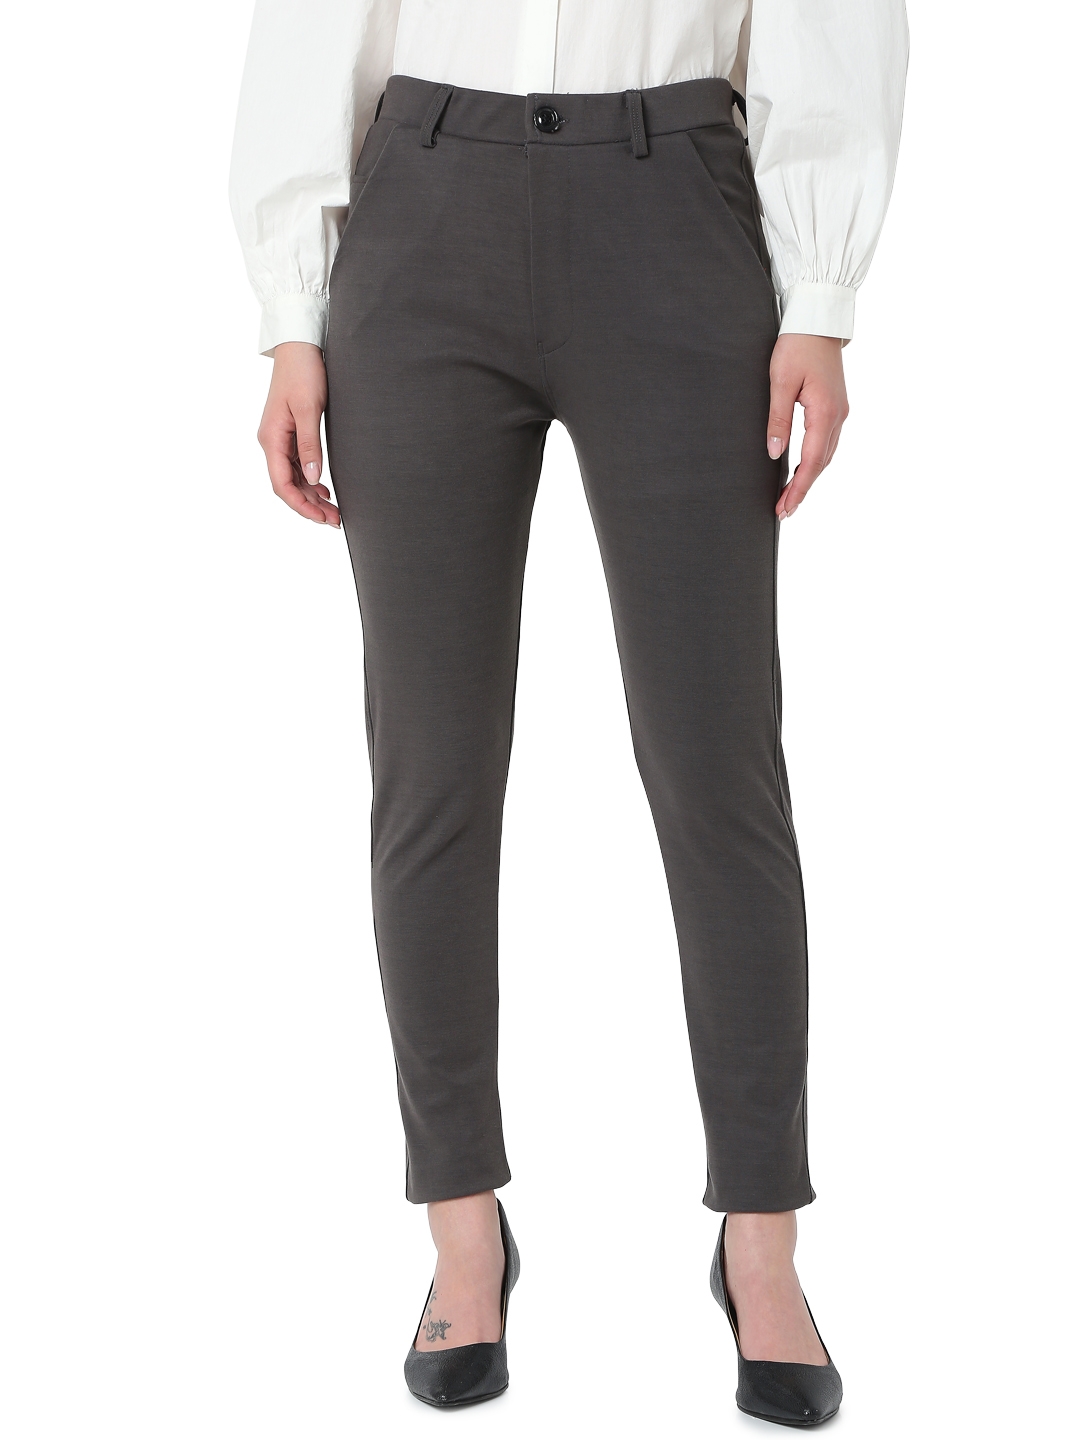 Cement Grey Cotton Trouser For Women | Solid Regular Fit | सादा /SAADAA-cheohanoi.vn